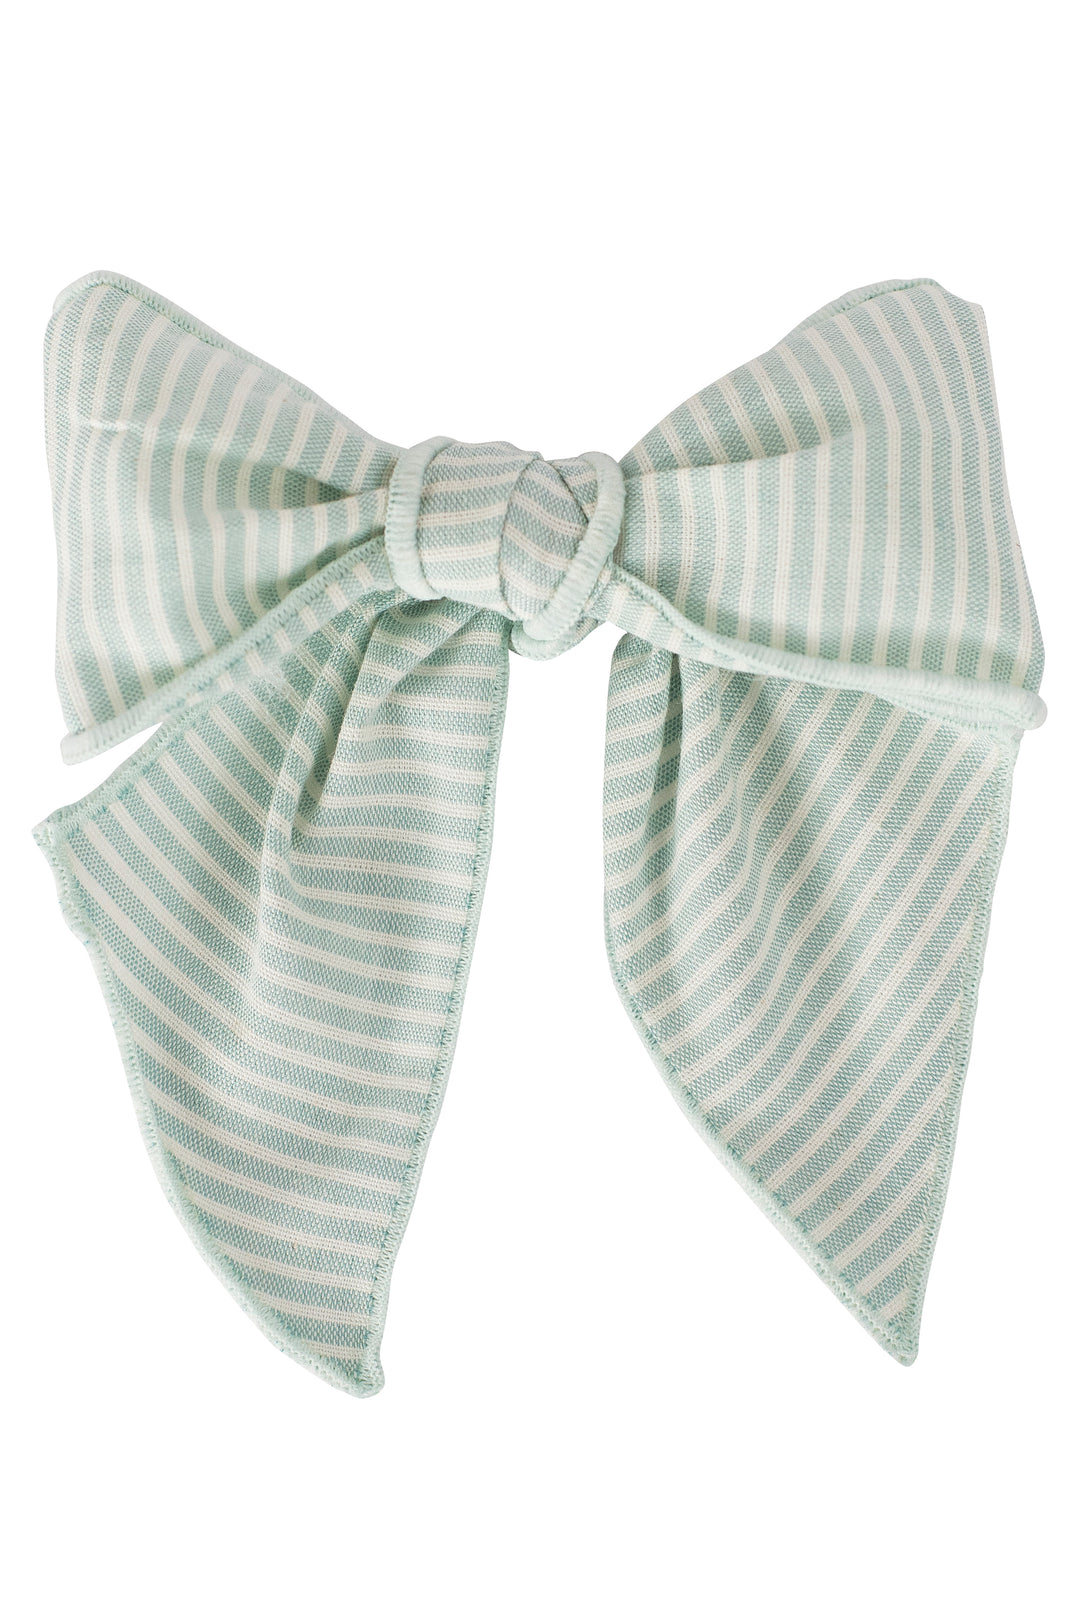 Calamaro Excellentt PREORDER Mint Green Striped Hair Bow | Millie and John